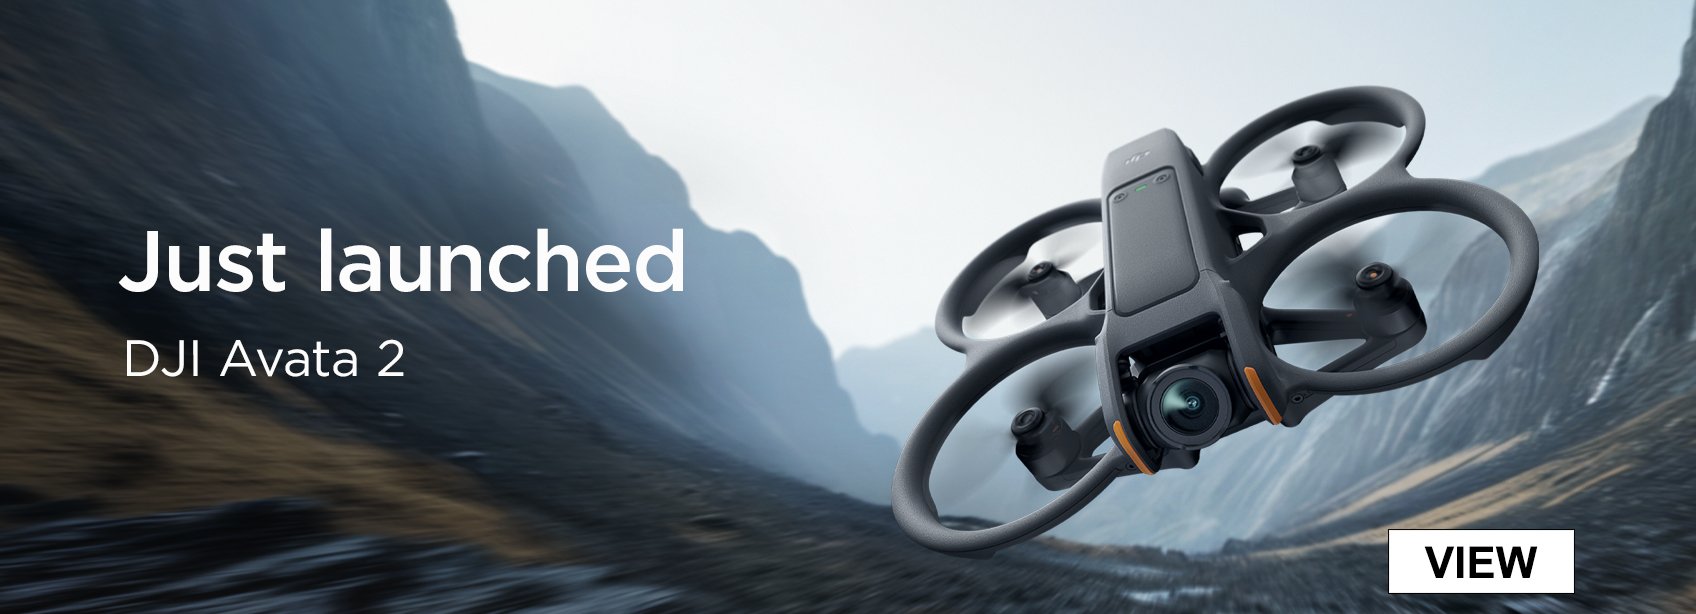 just launched DJI Avata 2